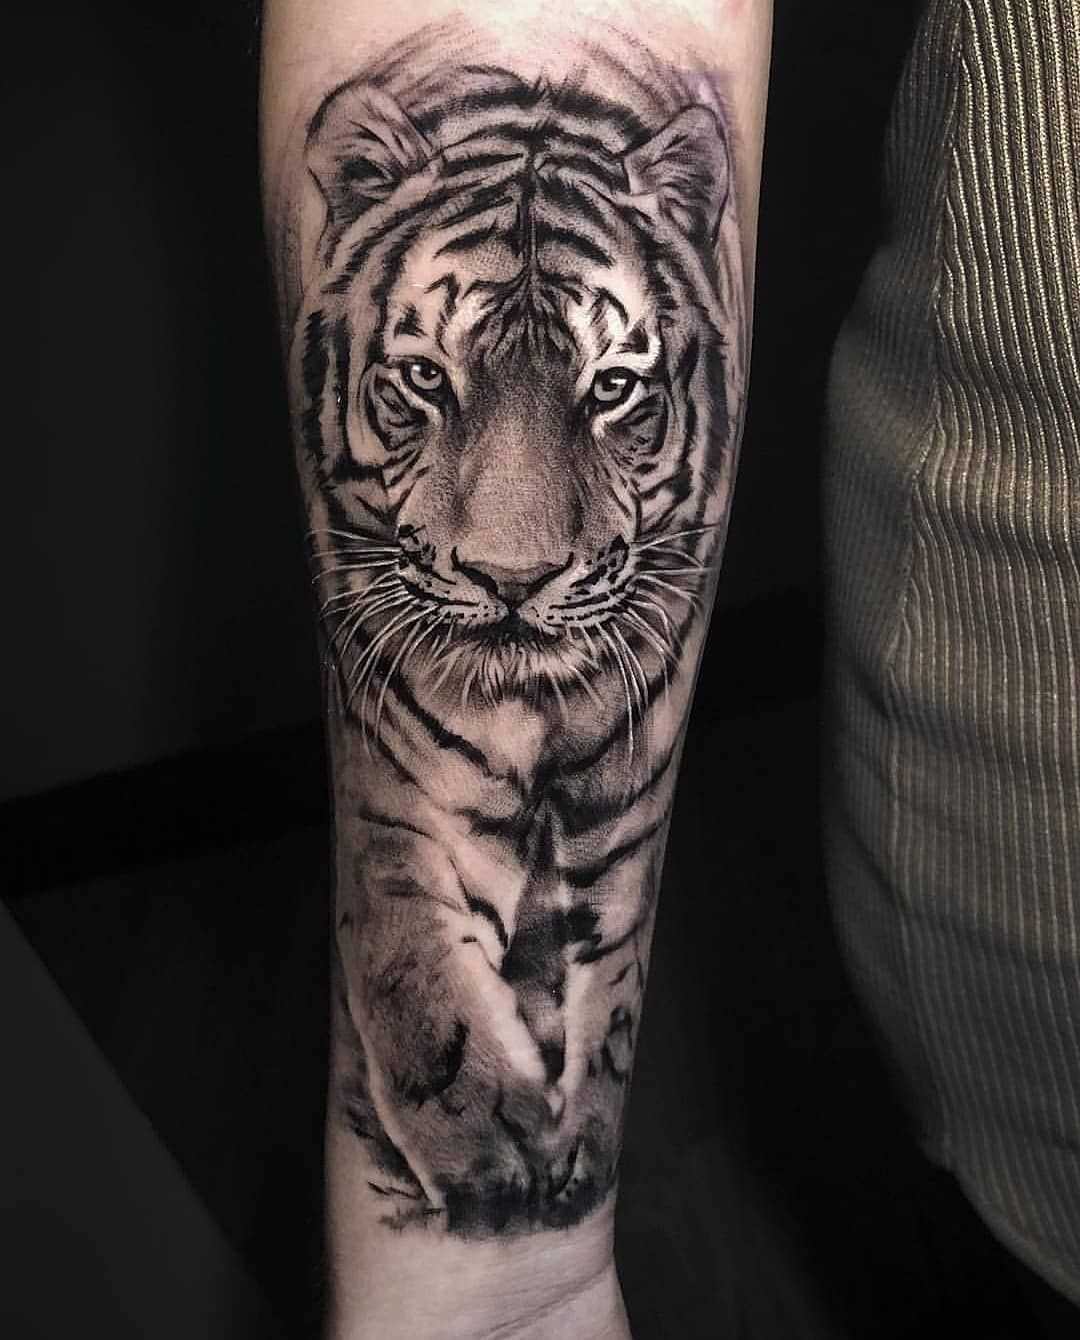 A tiger tattoo can symbolize the outdoors or a special someone in your life. A tiger with cubs may symbolize a relationship.